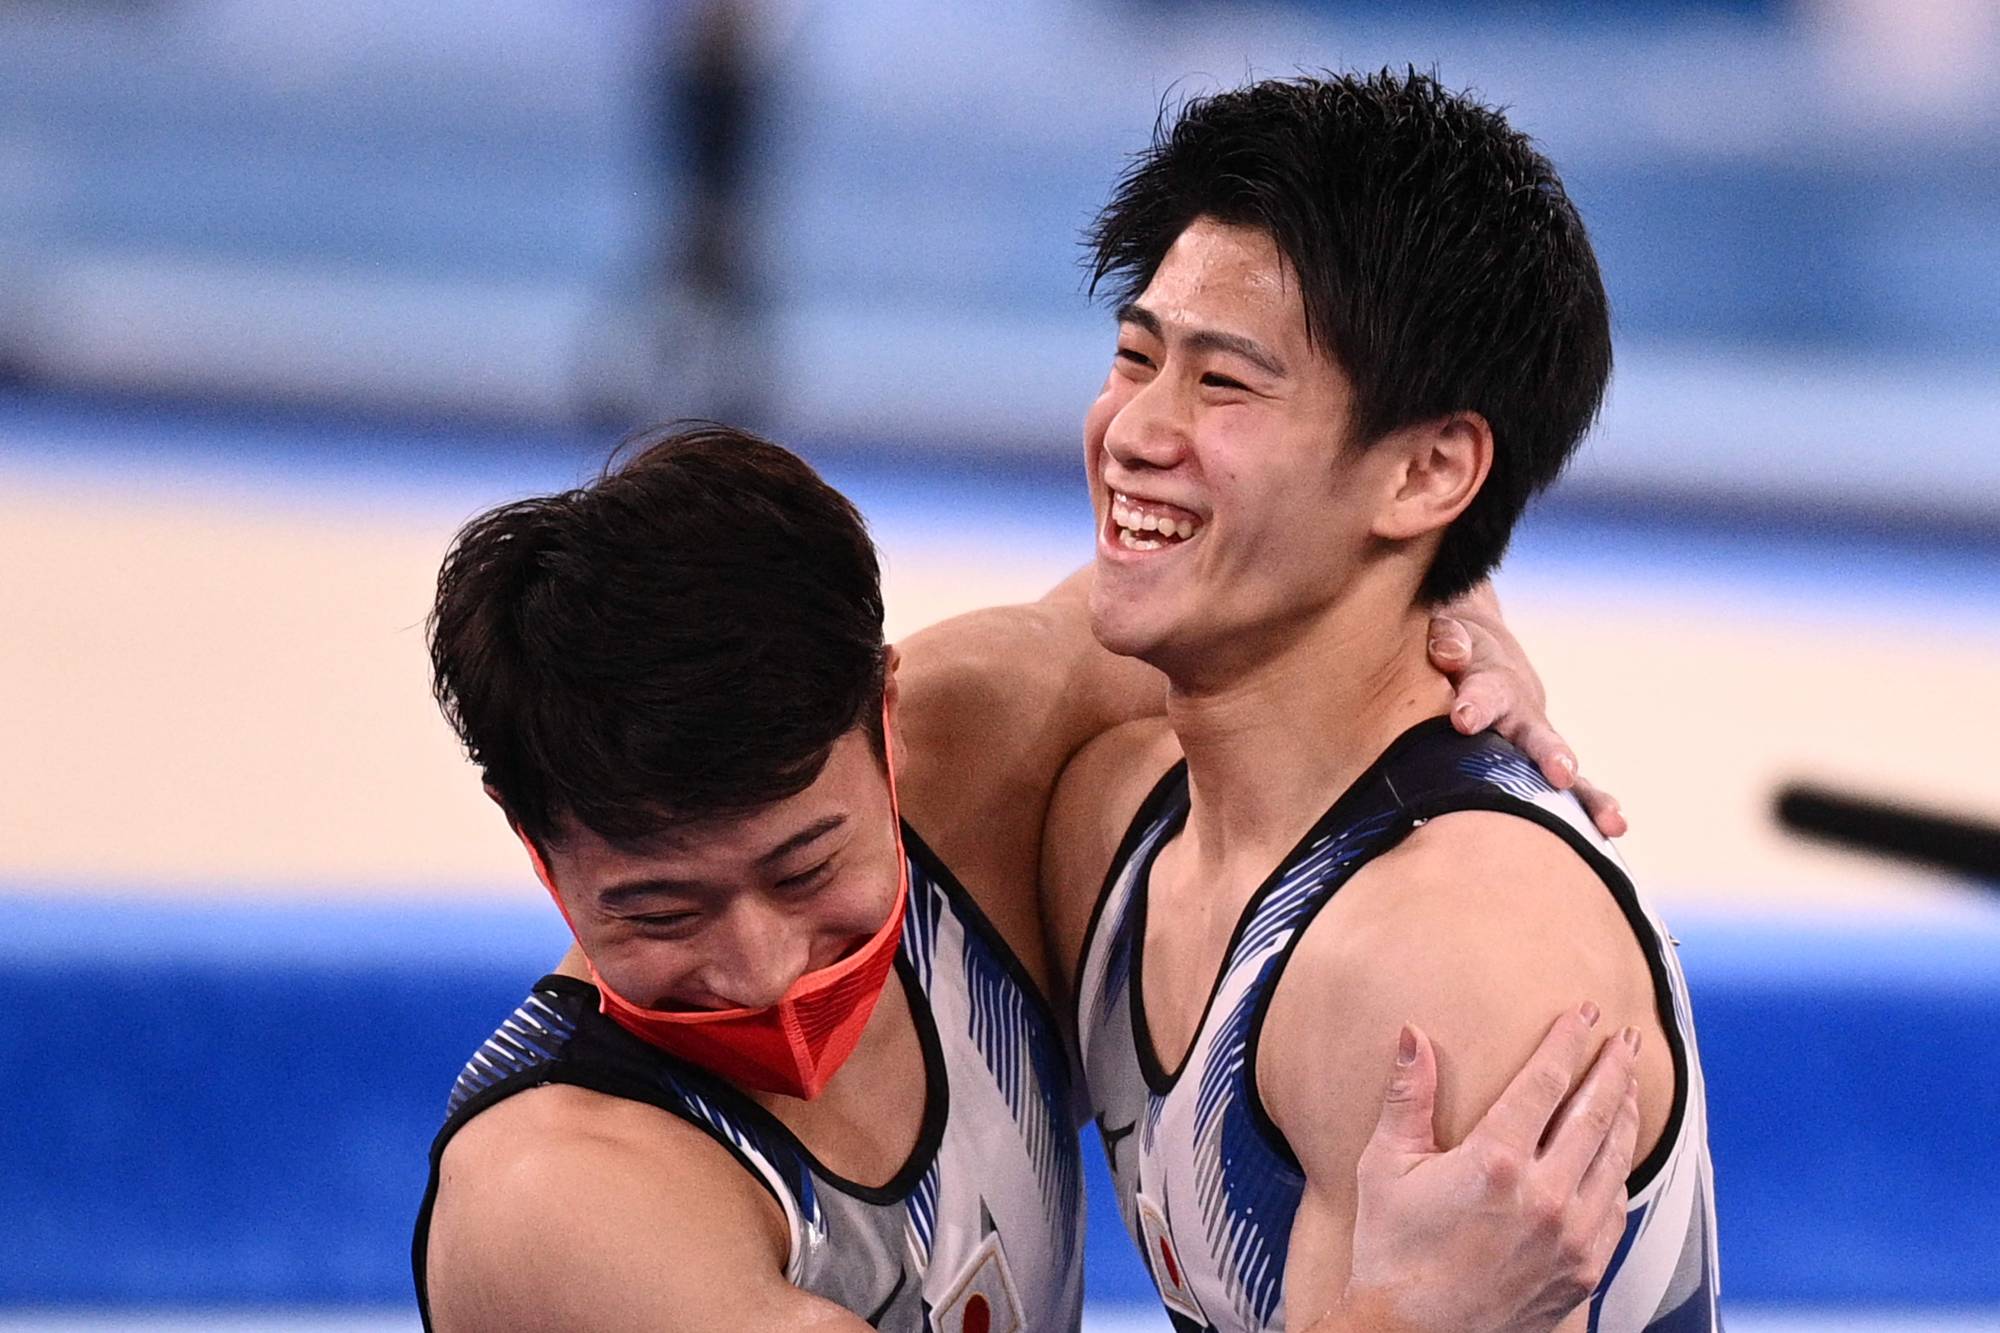 Men's Artistic Individual Finals: D. Hashimoto of Japan Takes Home The Gold in a Spectacular Final 